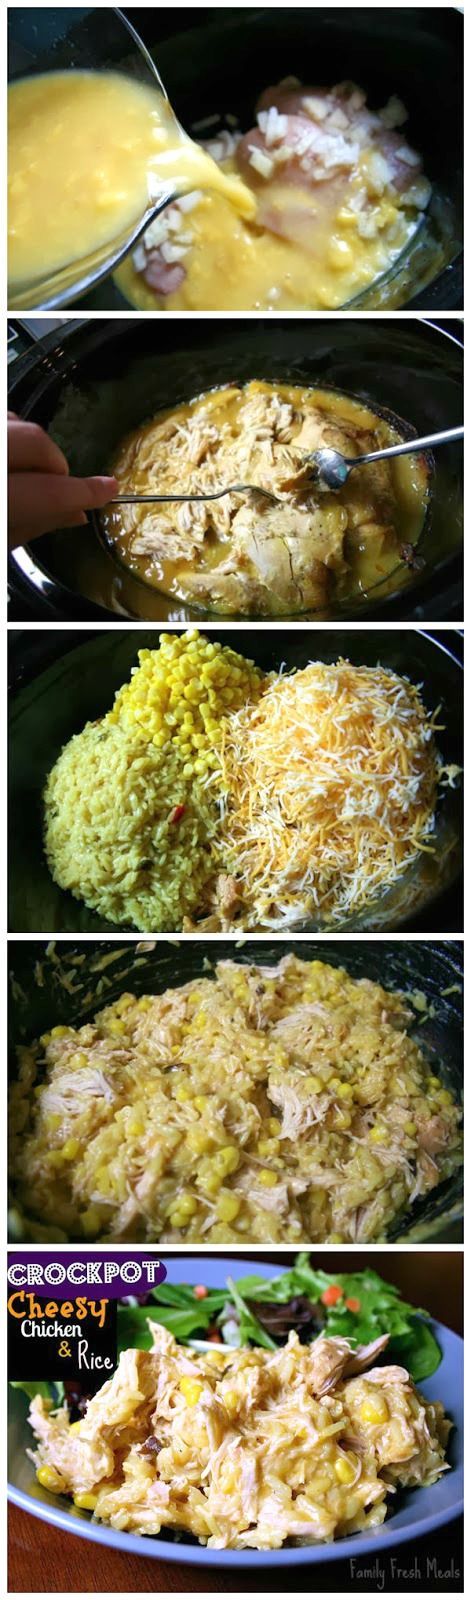 Crockpot Cheesy Chicken and Rice This slow cooker meal is a WINNER! Best dinner ever!